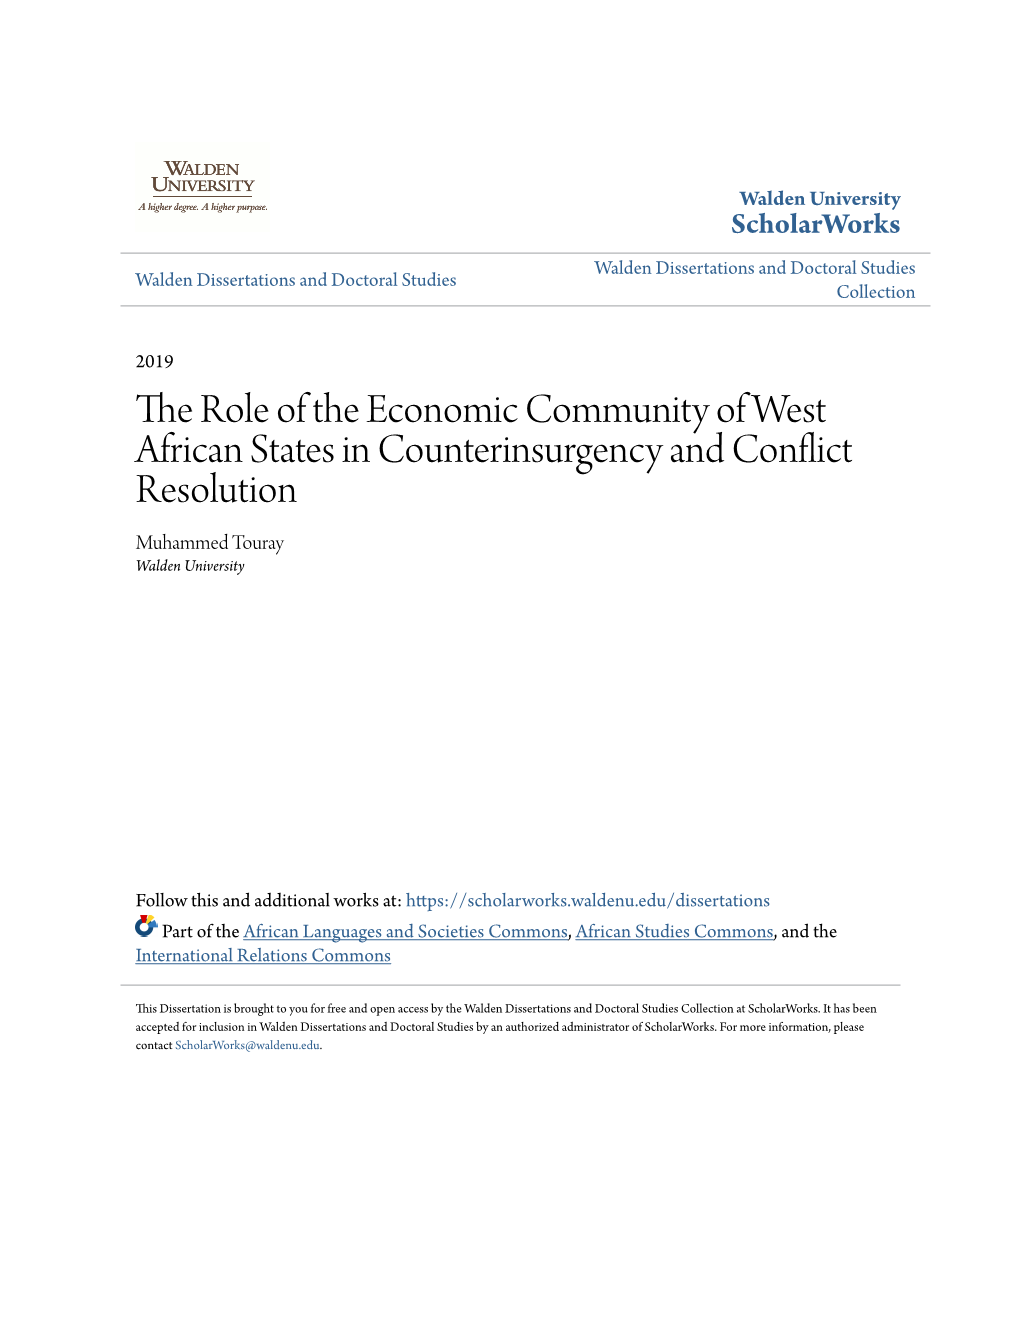 The Role of the Economic Community of West African States in Counterinsurgency and Conflict Resolution Muhammed Touray Walden University